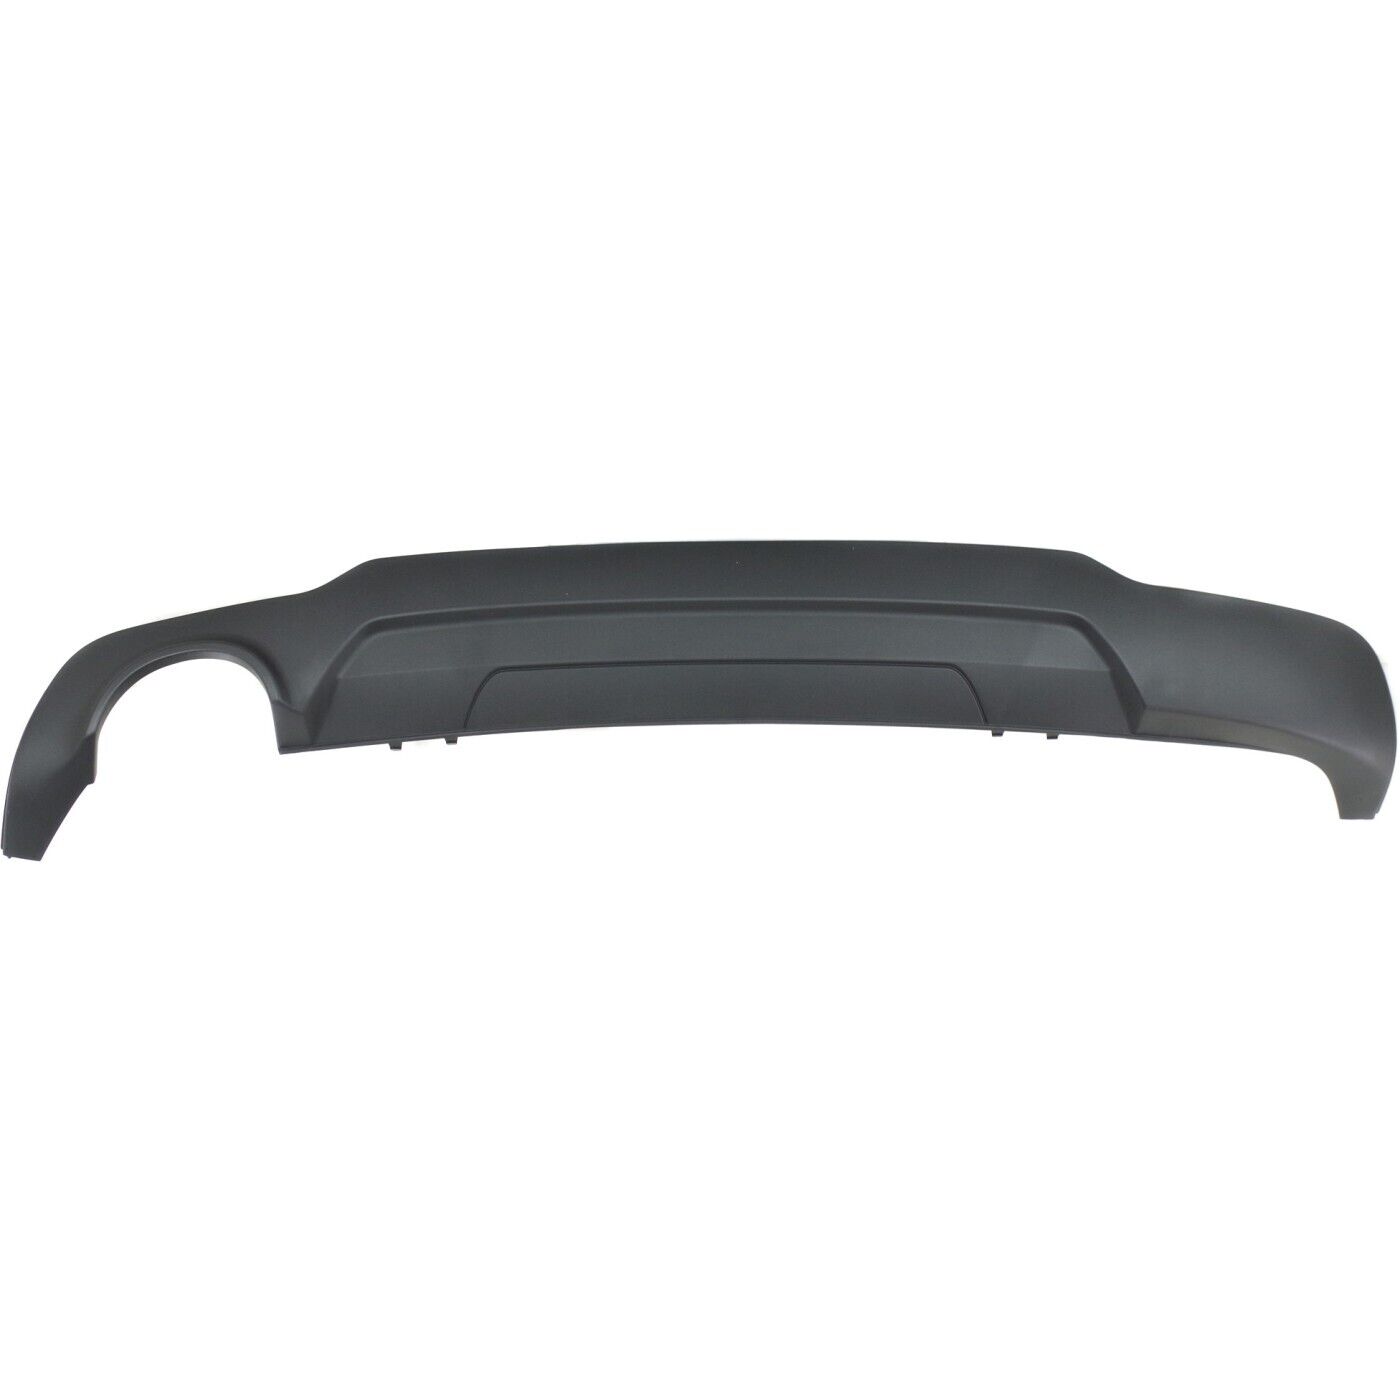 2012-2014 MERCEDES-BENZ C-CLASS; Rear Bumper Cover lower; Air dam C250 W204 SDN/CPE RWD w/Sport Pkg Painted to Match